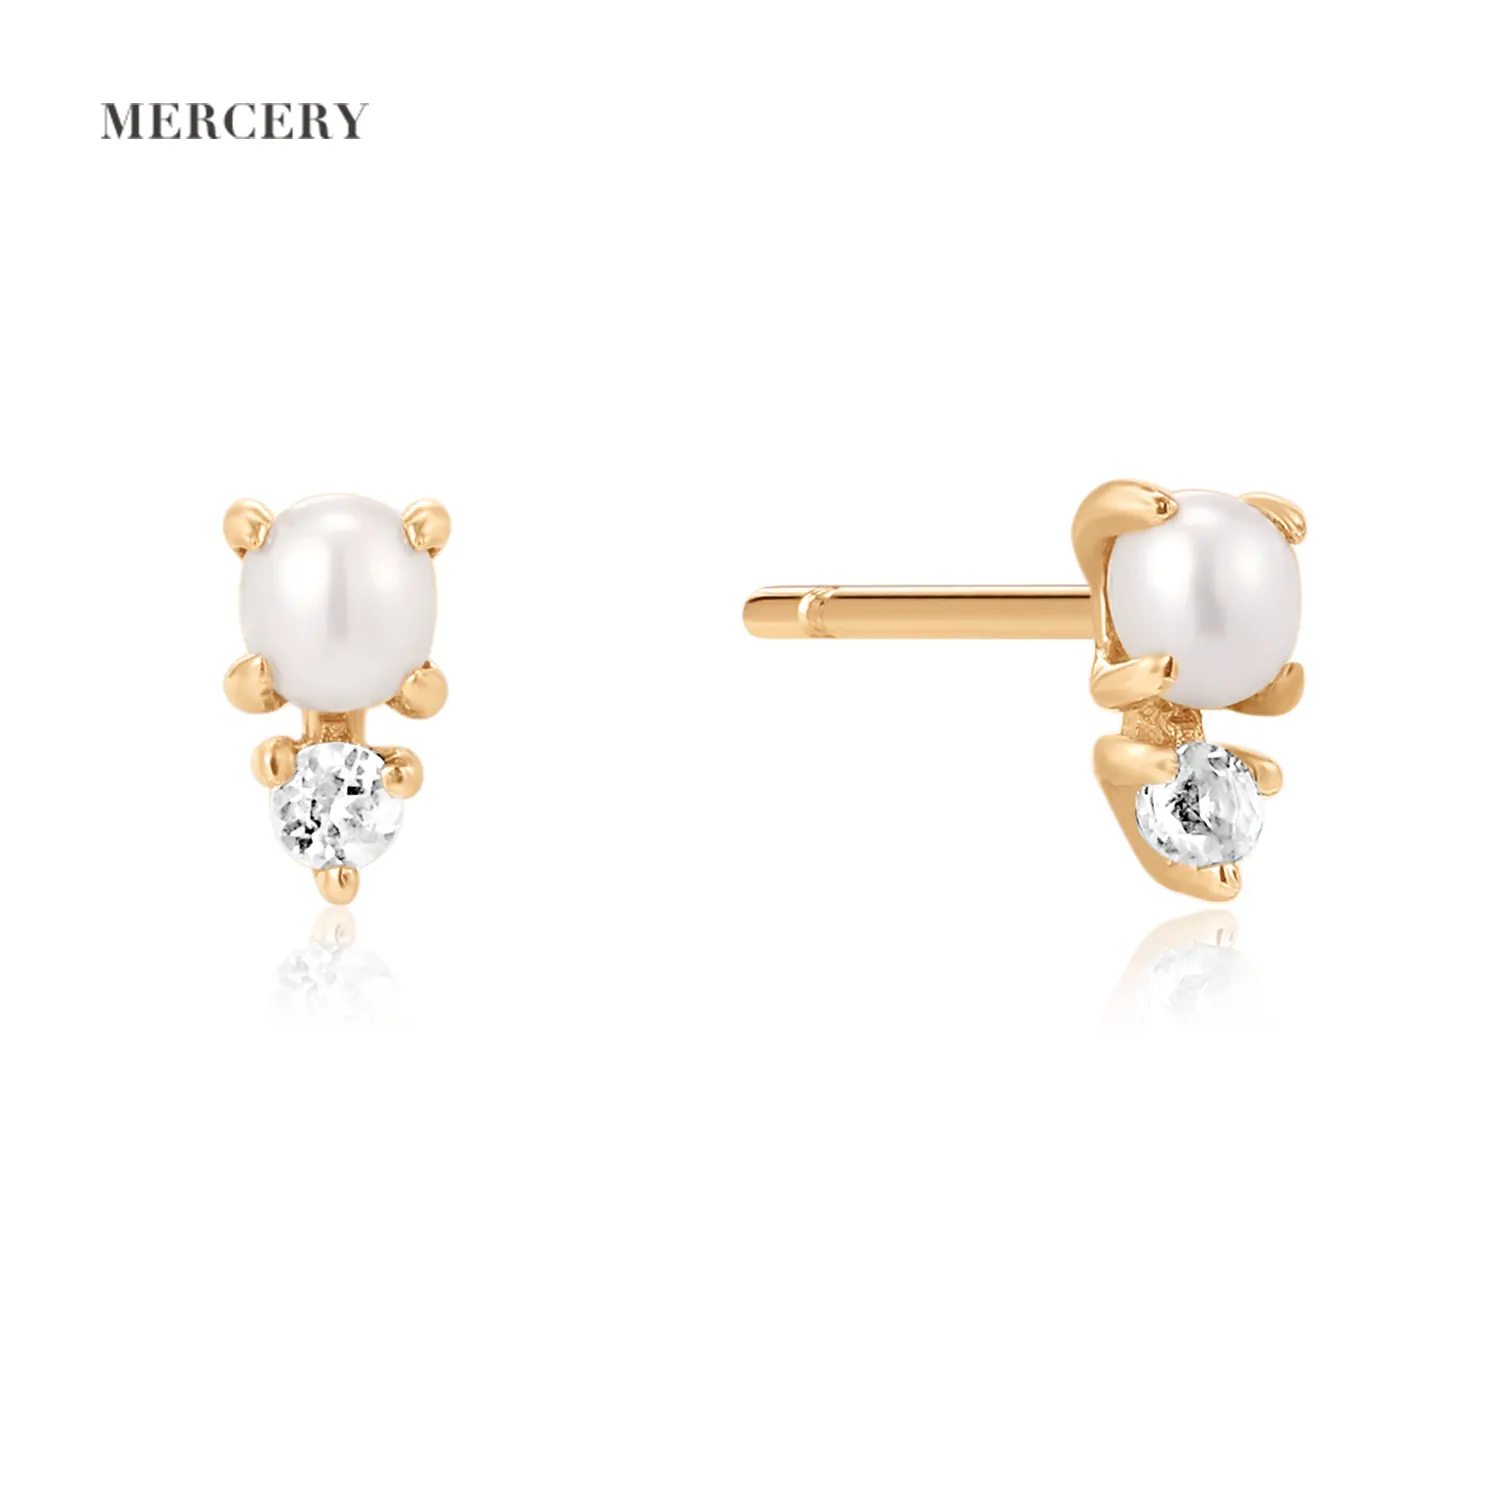 Fashionable Light Luxury Jewelry Diamond and Pearl Earrings 14K Gold Earrings Hot Selling Anniversary Engagement Gift